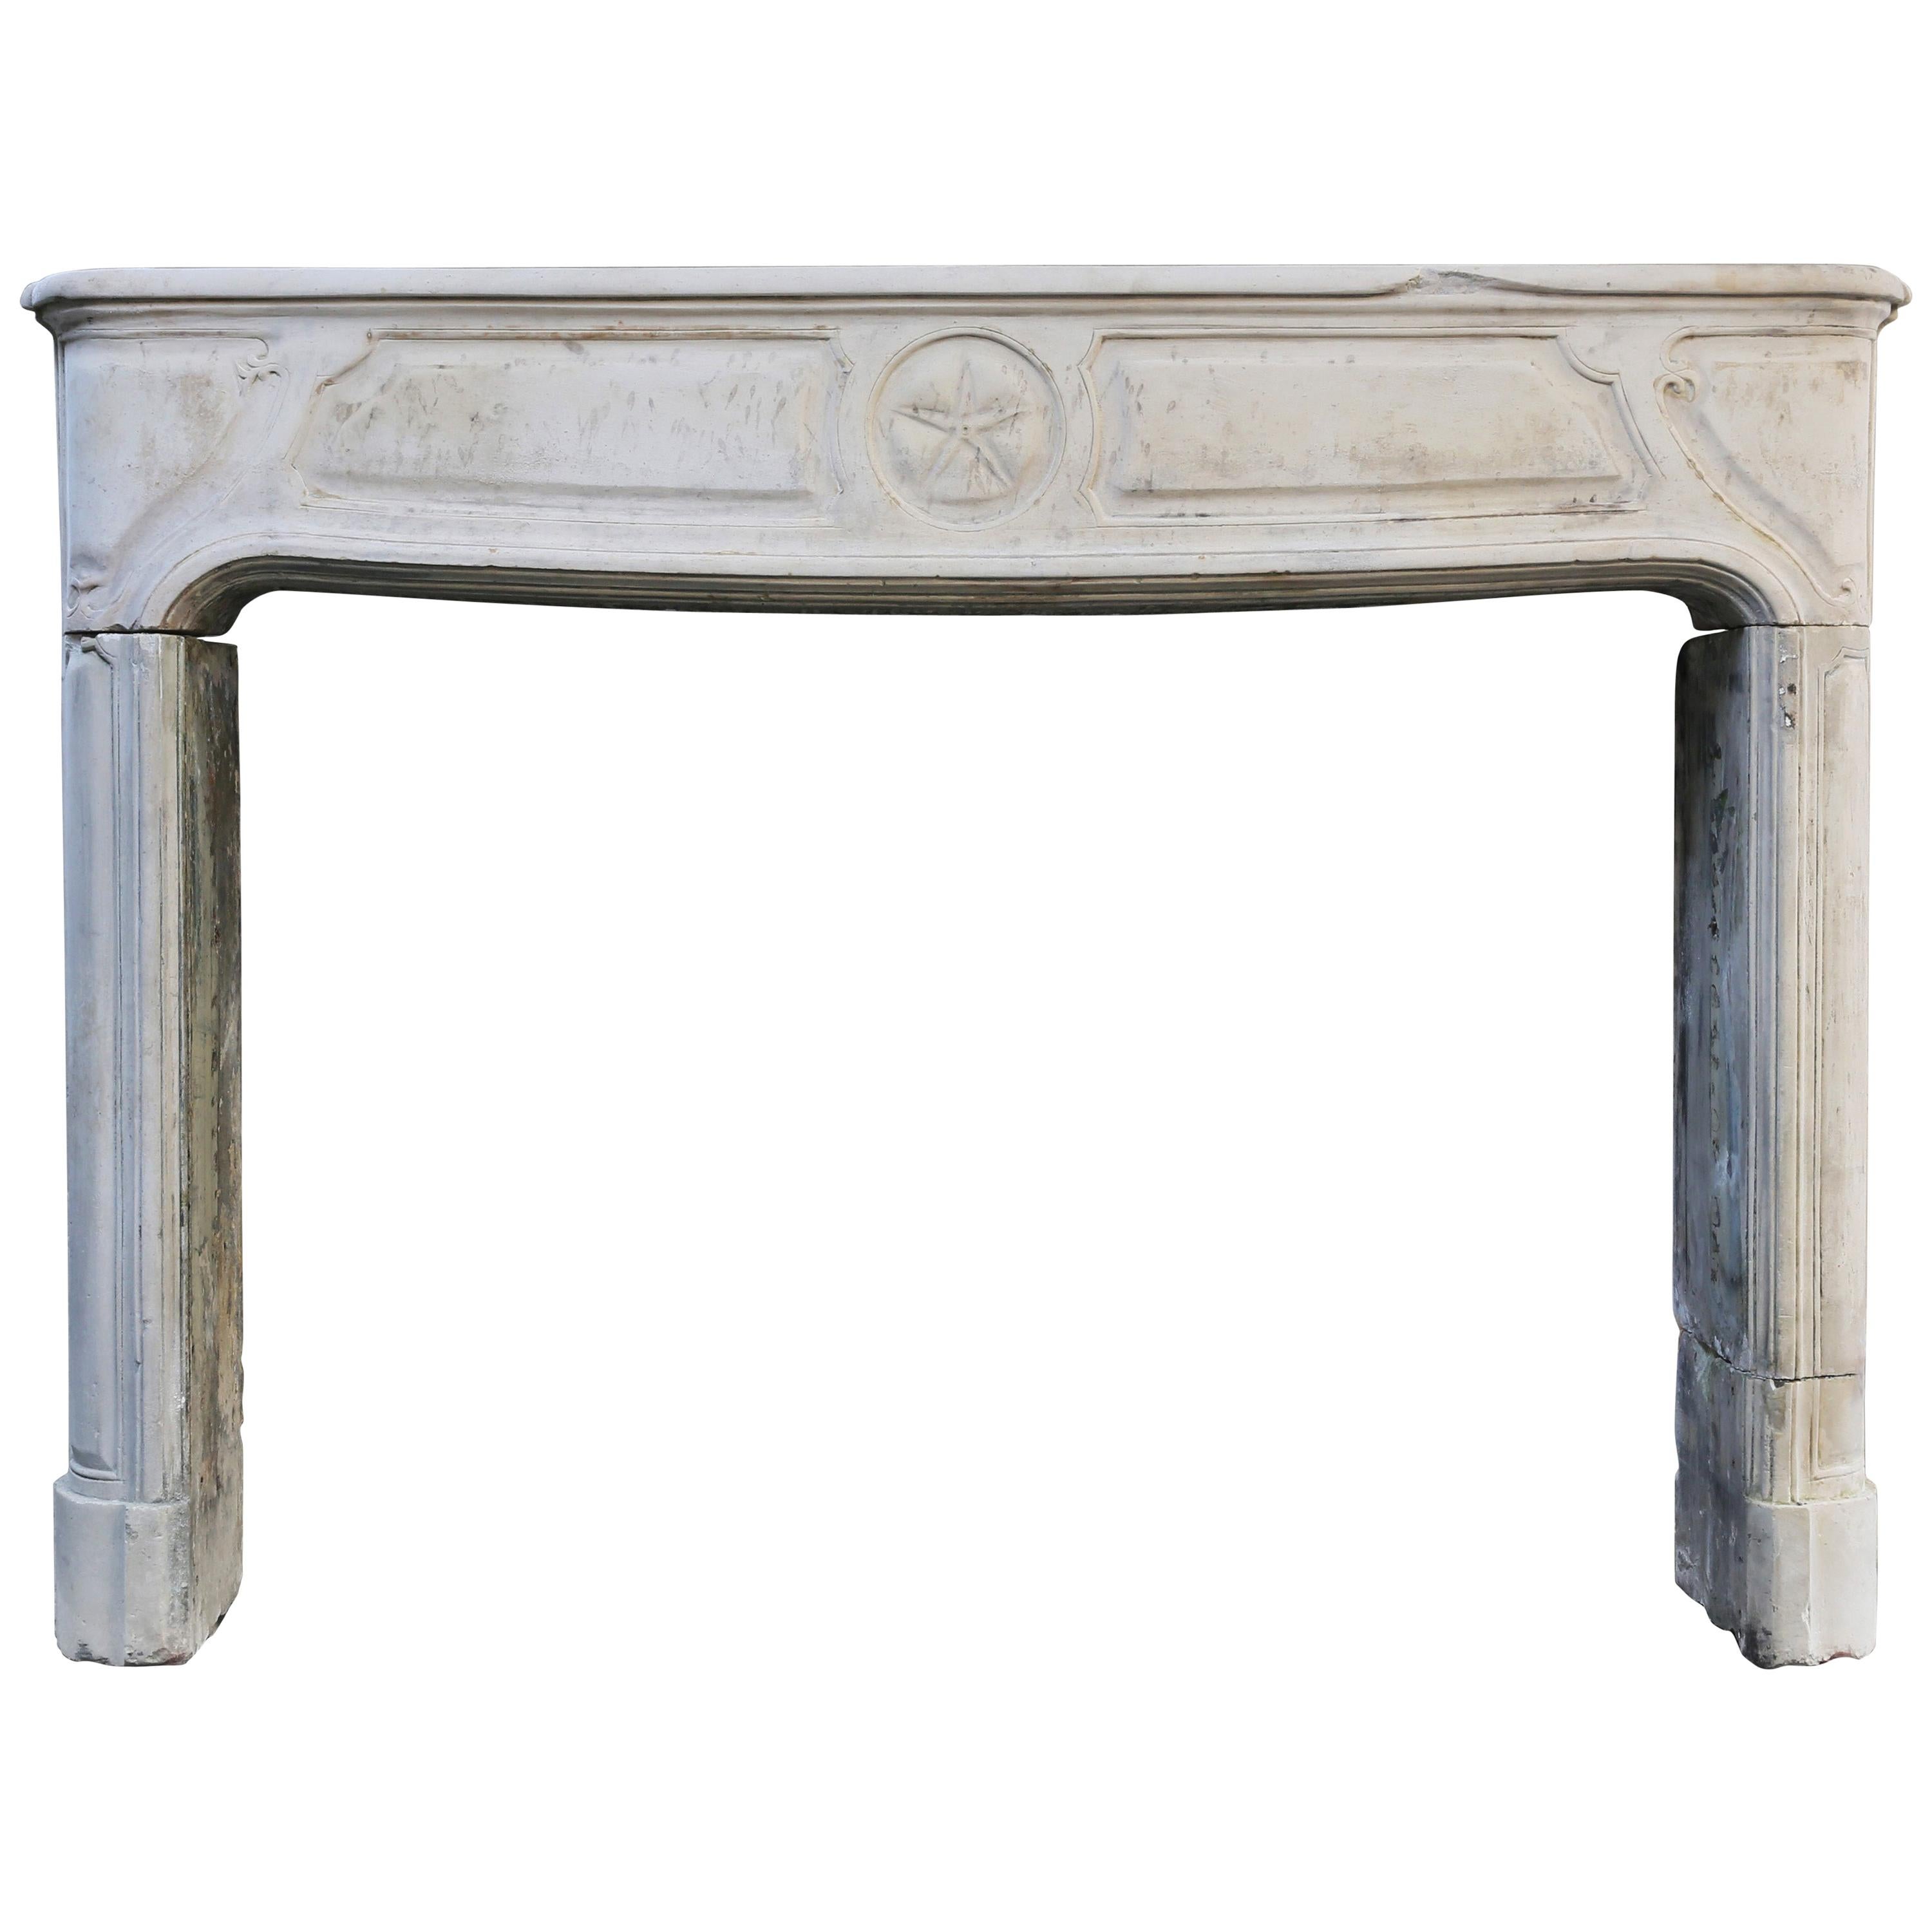 19th Century Antique Fireplace of French Limestone in Style of Louis XIV